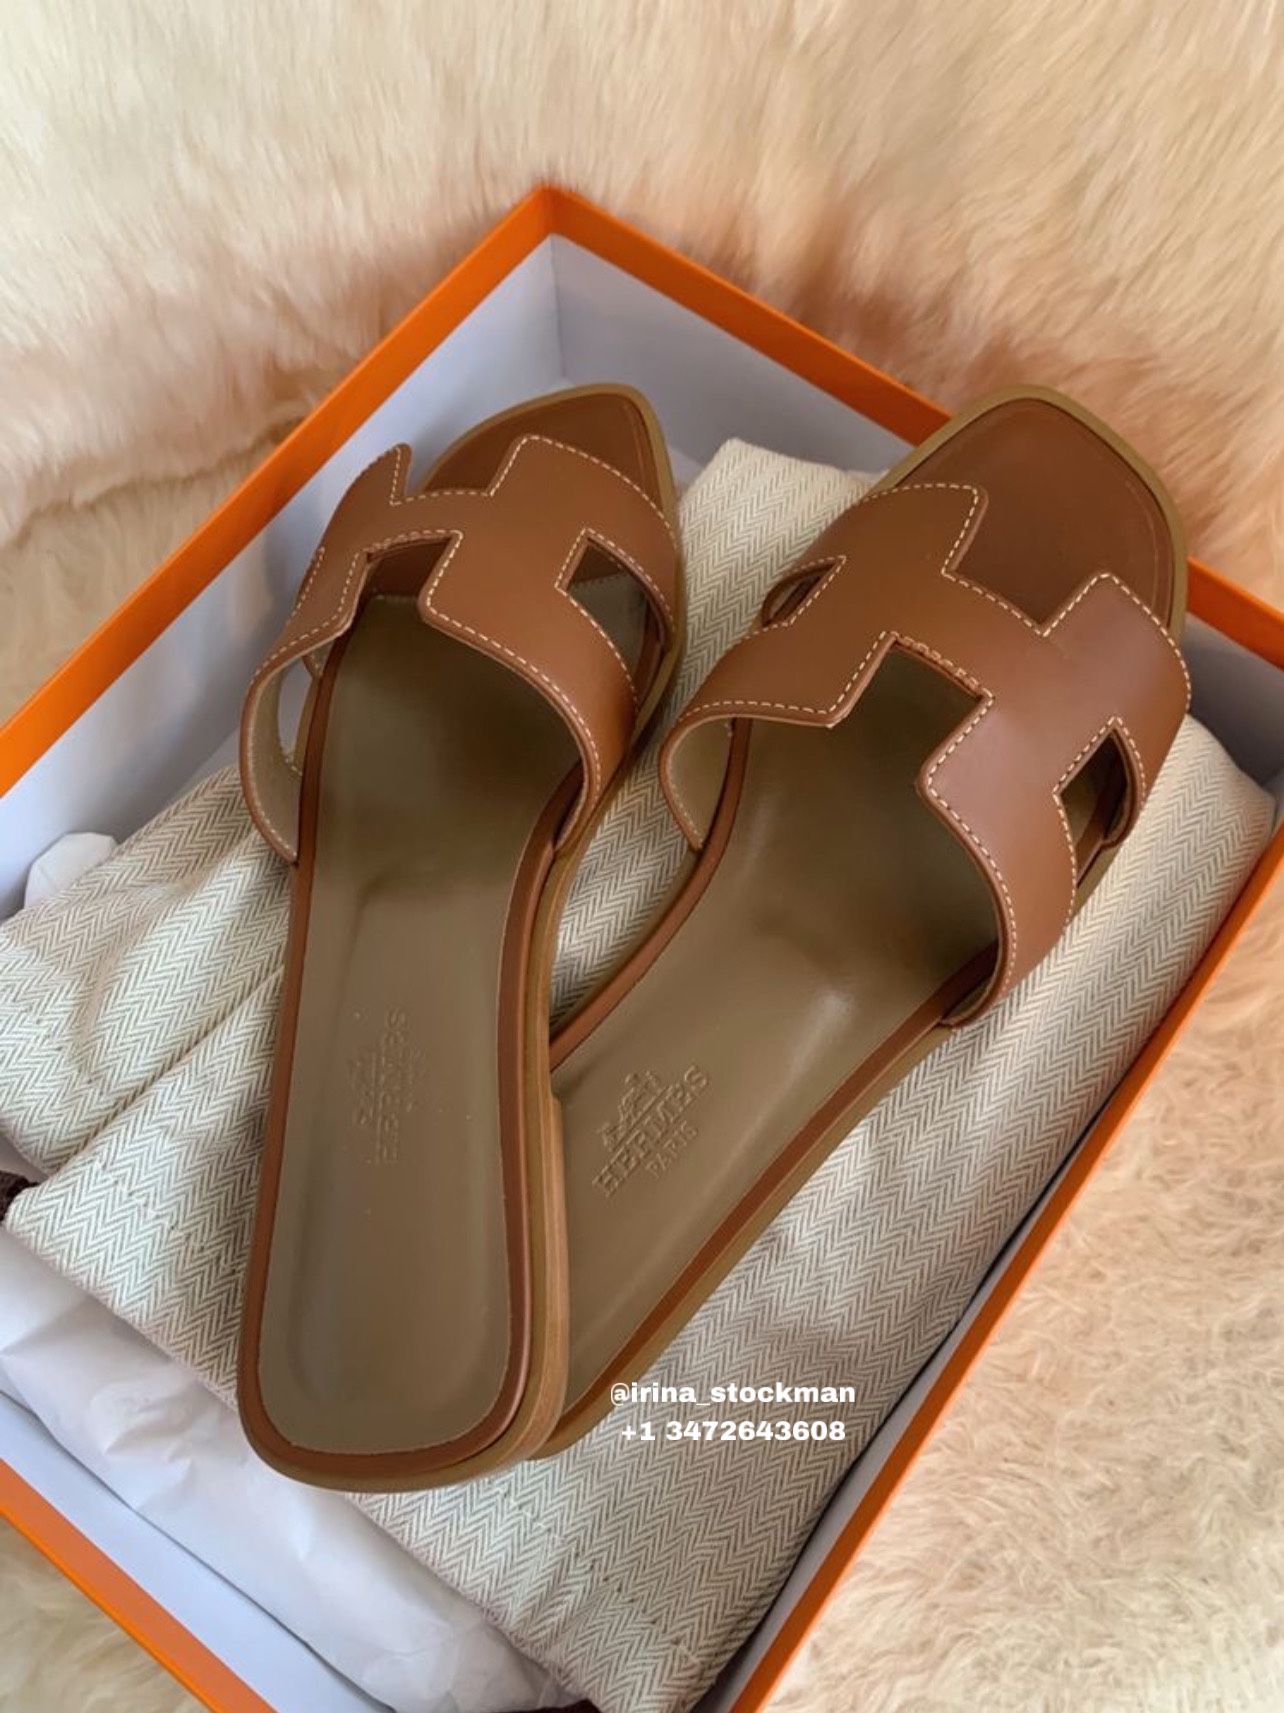 Elite Lounge: Hermes Slippers for Sale in New York, NY - OfferUp